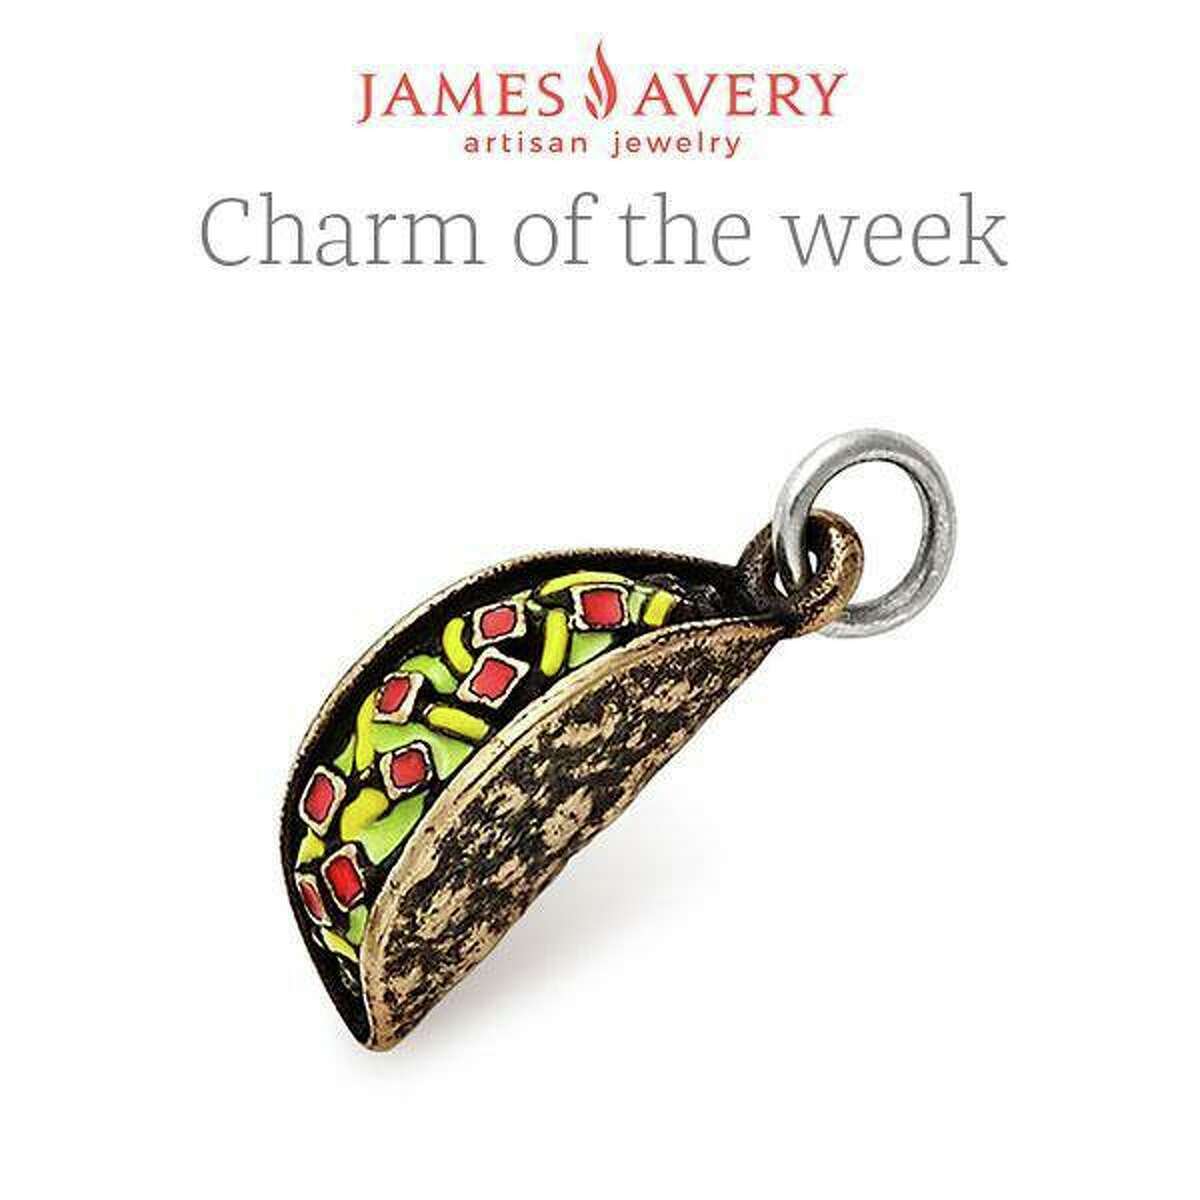 James Avery Artisan Jewelry promoted the new product, a bronze tortilla shell stuffed with enameled veggies, as the "Charm of the Week."